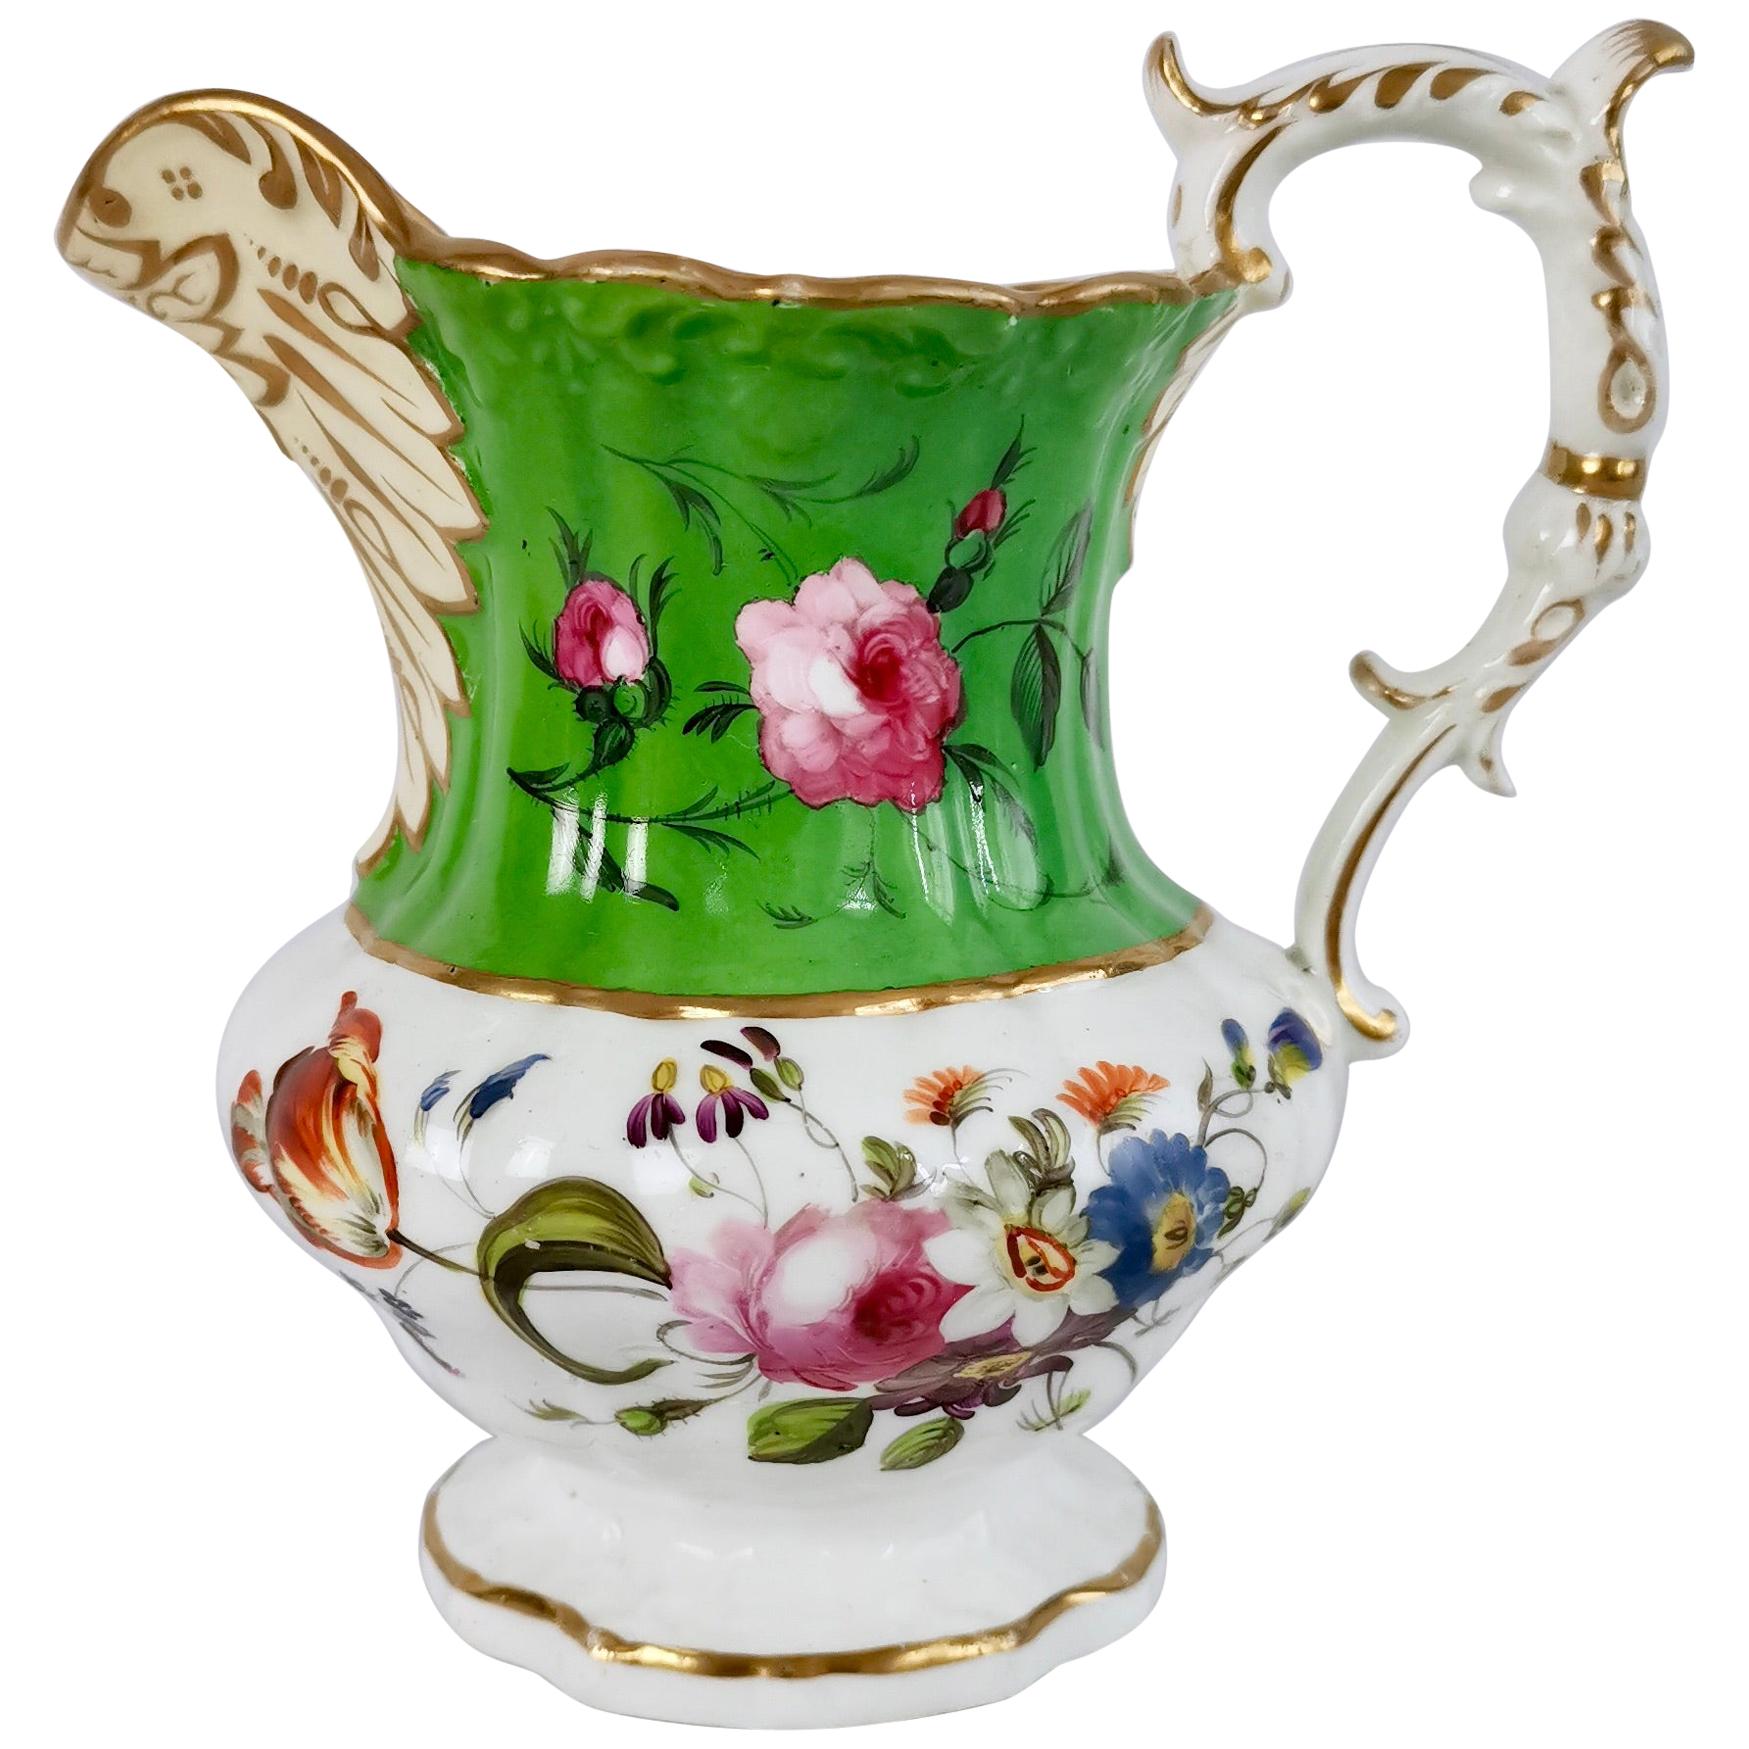 Hilditch Porcelain Pitcher, Apple Green with Hand Painted Flowers, circa 1830